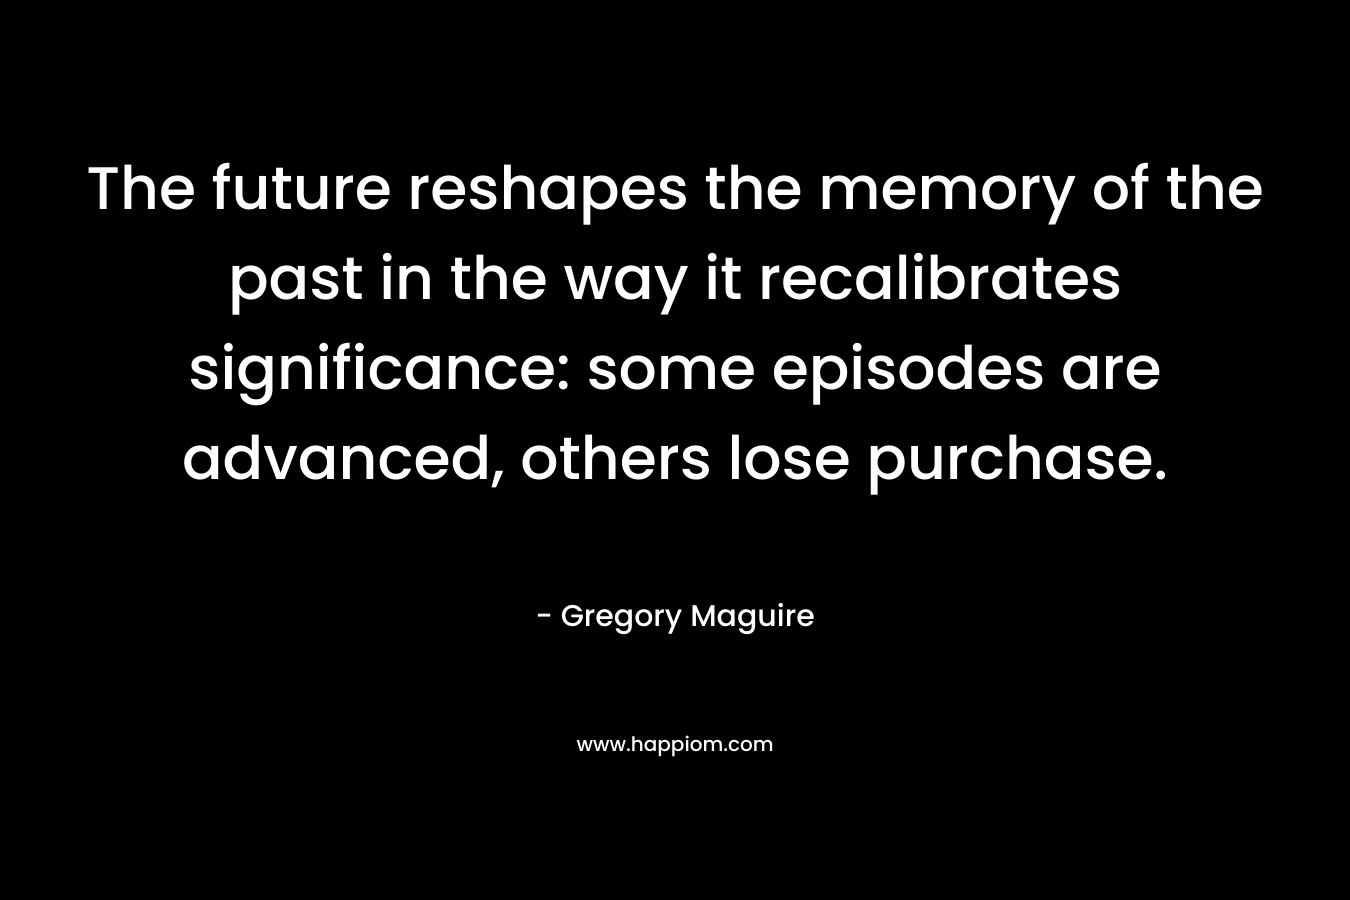 The future reshapes the memory of the past in the way it recalibrates significance: some episodes are advanced, others lose purchase.